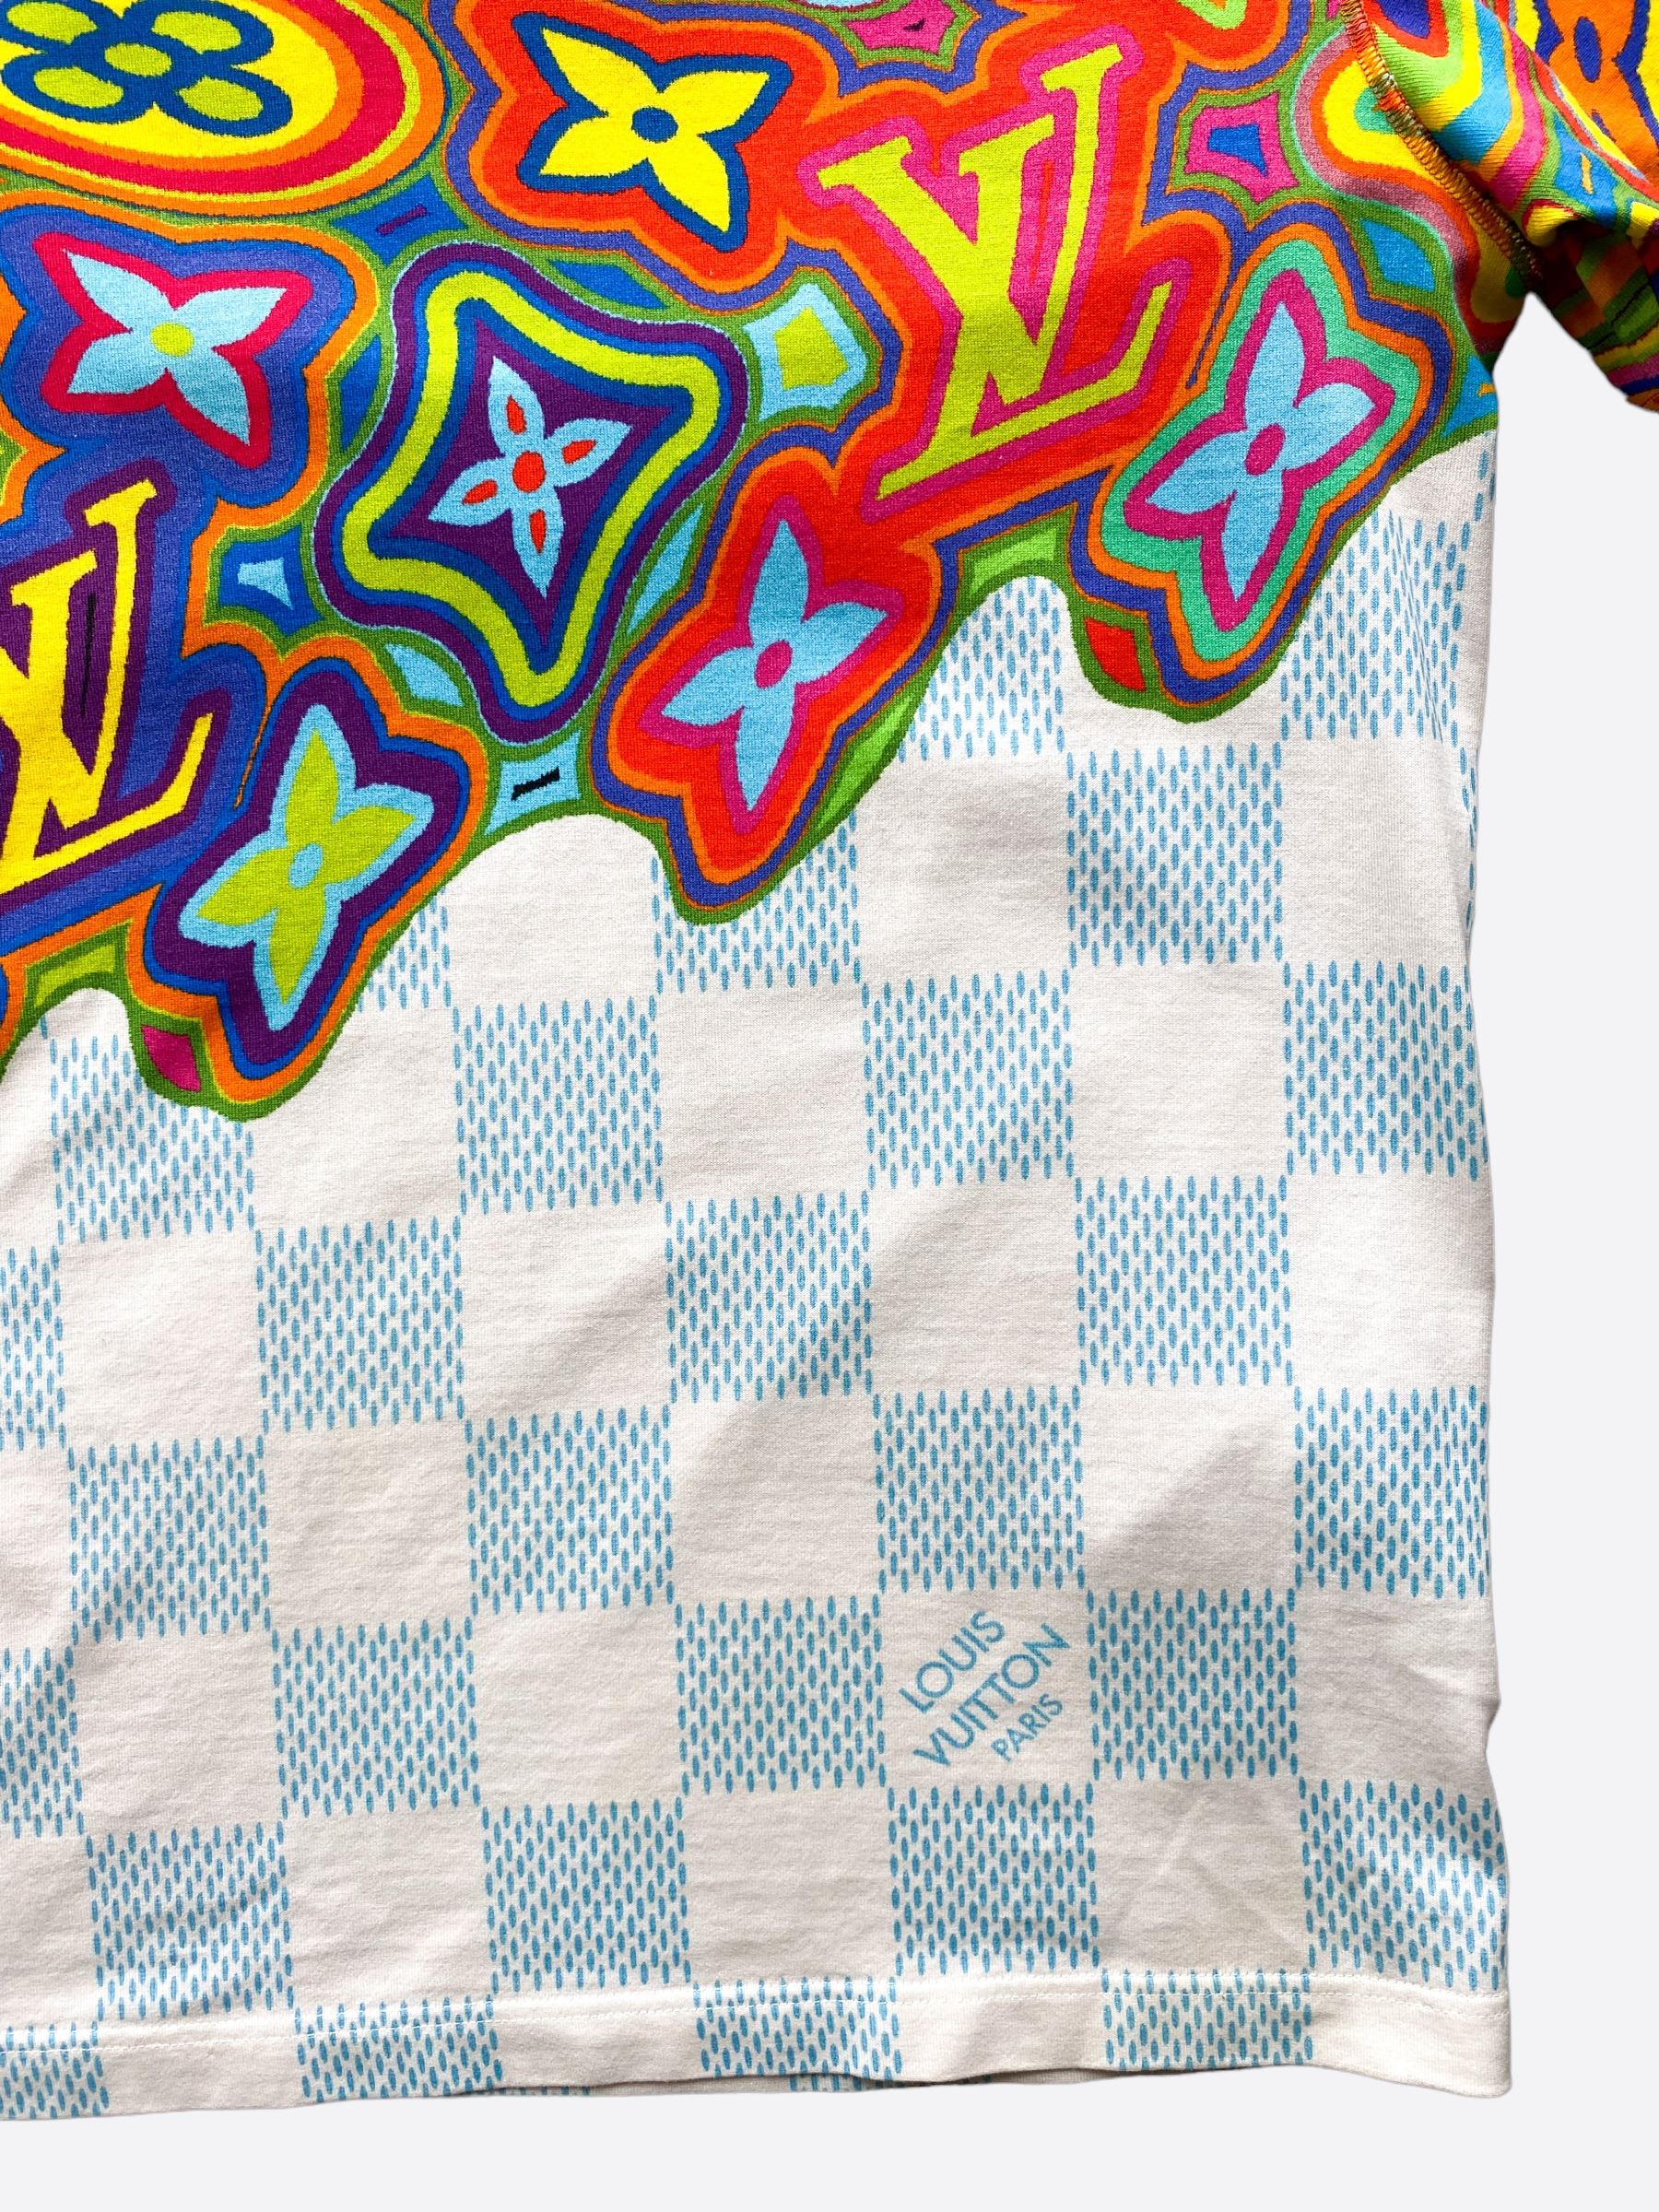 Louis Vuitton Psychedelic Print Tee Shirt – Savonches